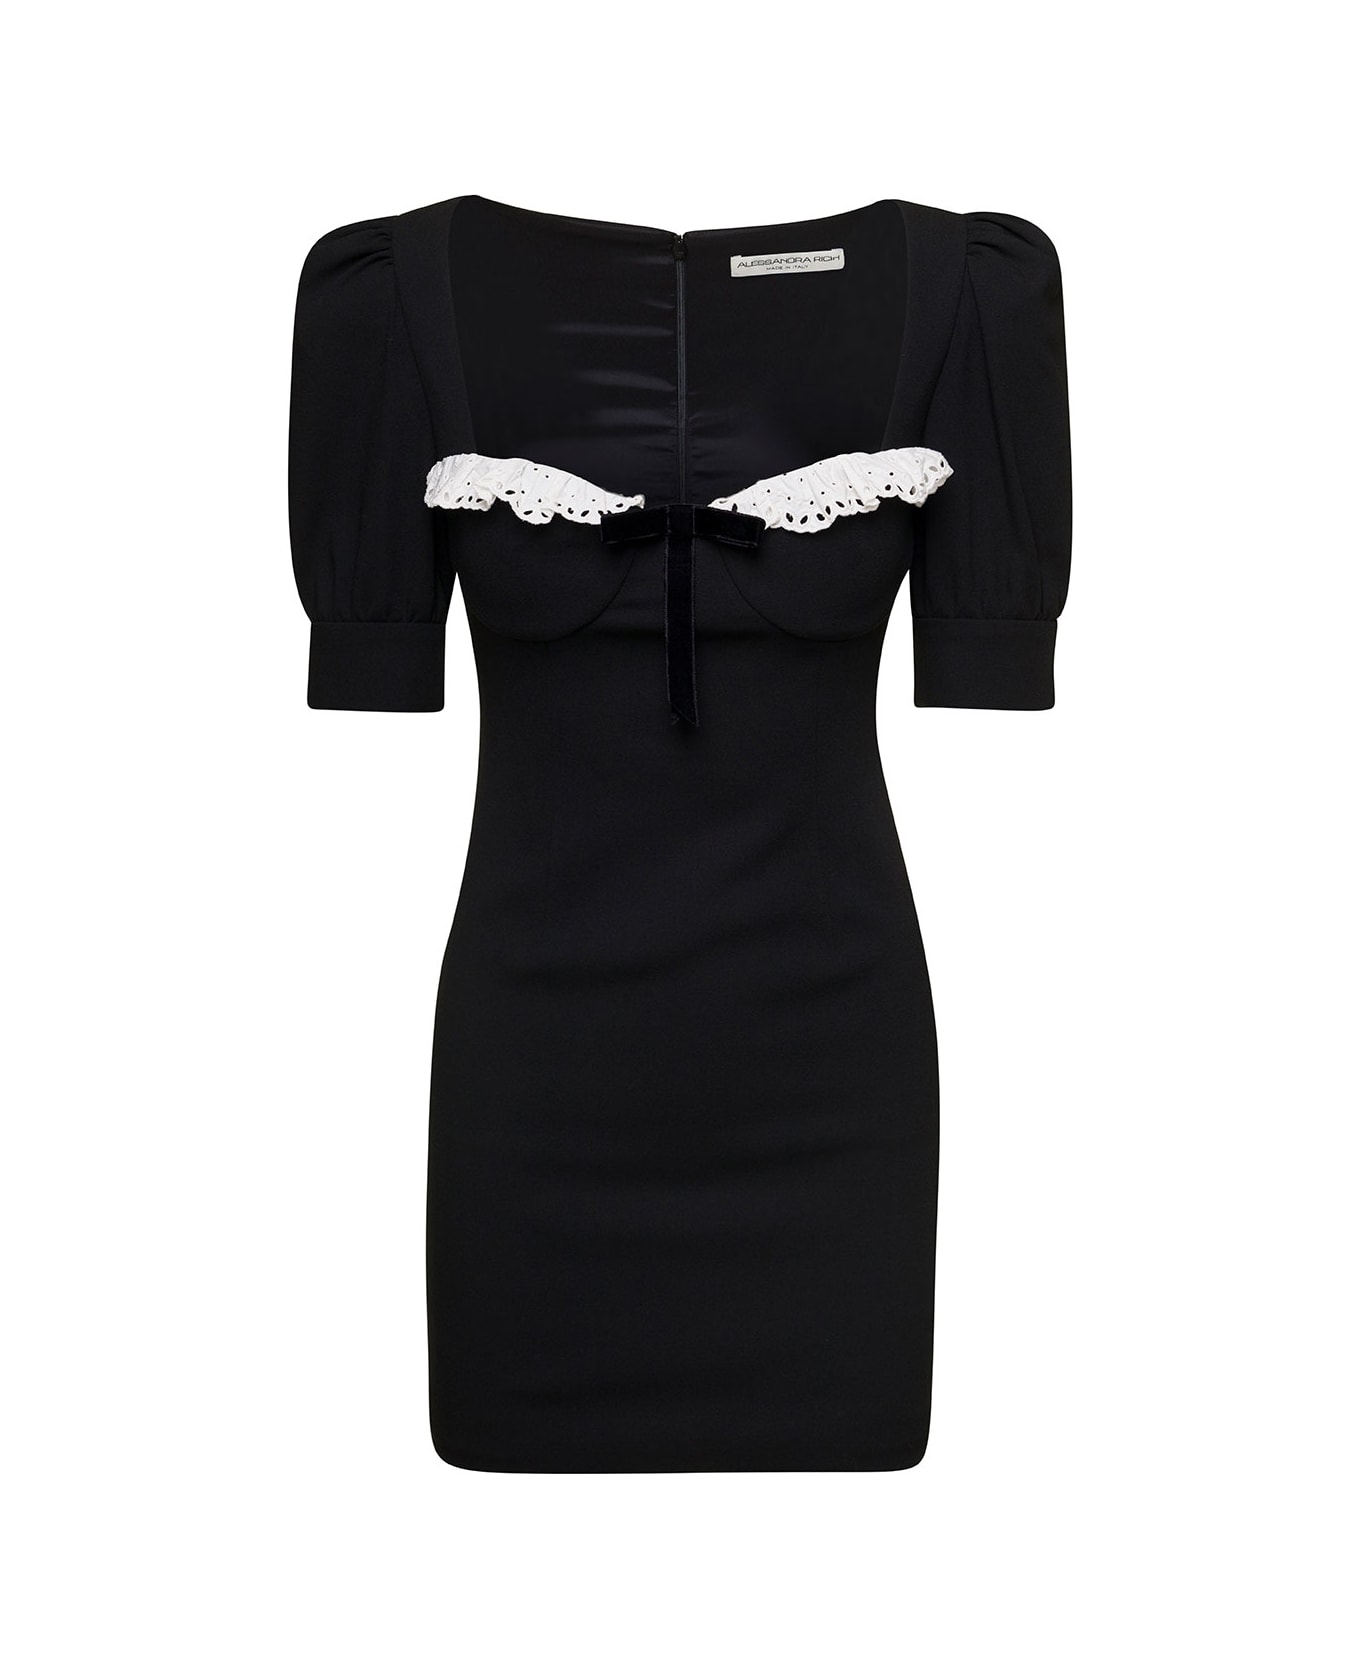 Alessandra Rich Black Mini Dress With Lace Detail On The Front In Wool Woman - Black ワンピース＆ドレス